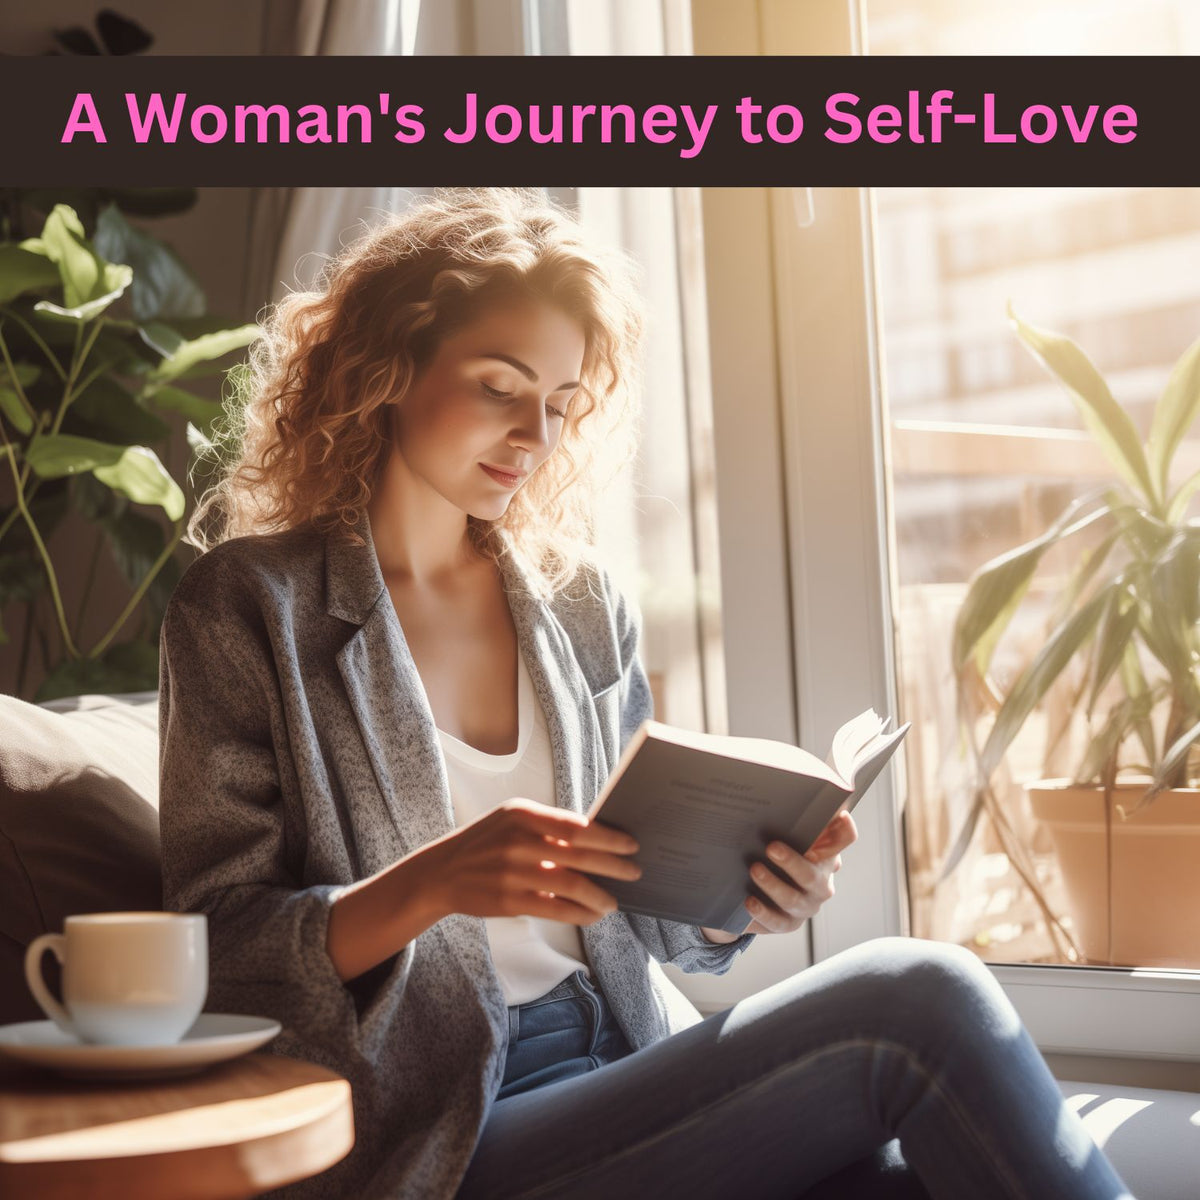 A Woman's Journey to Self-Love